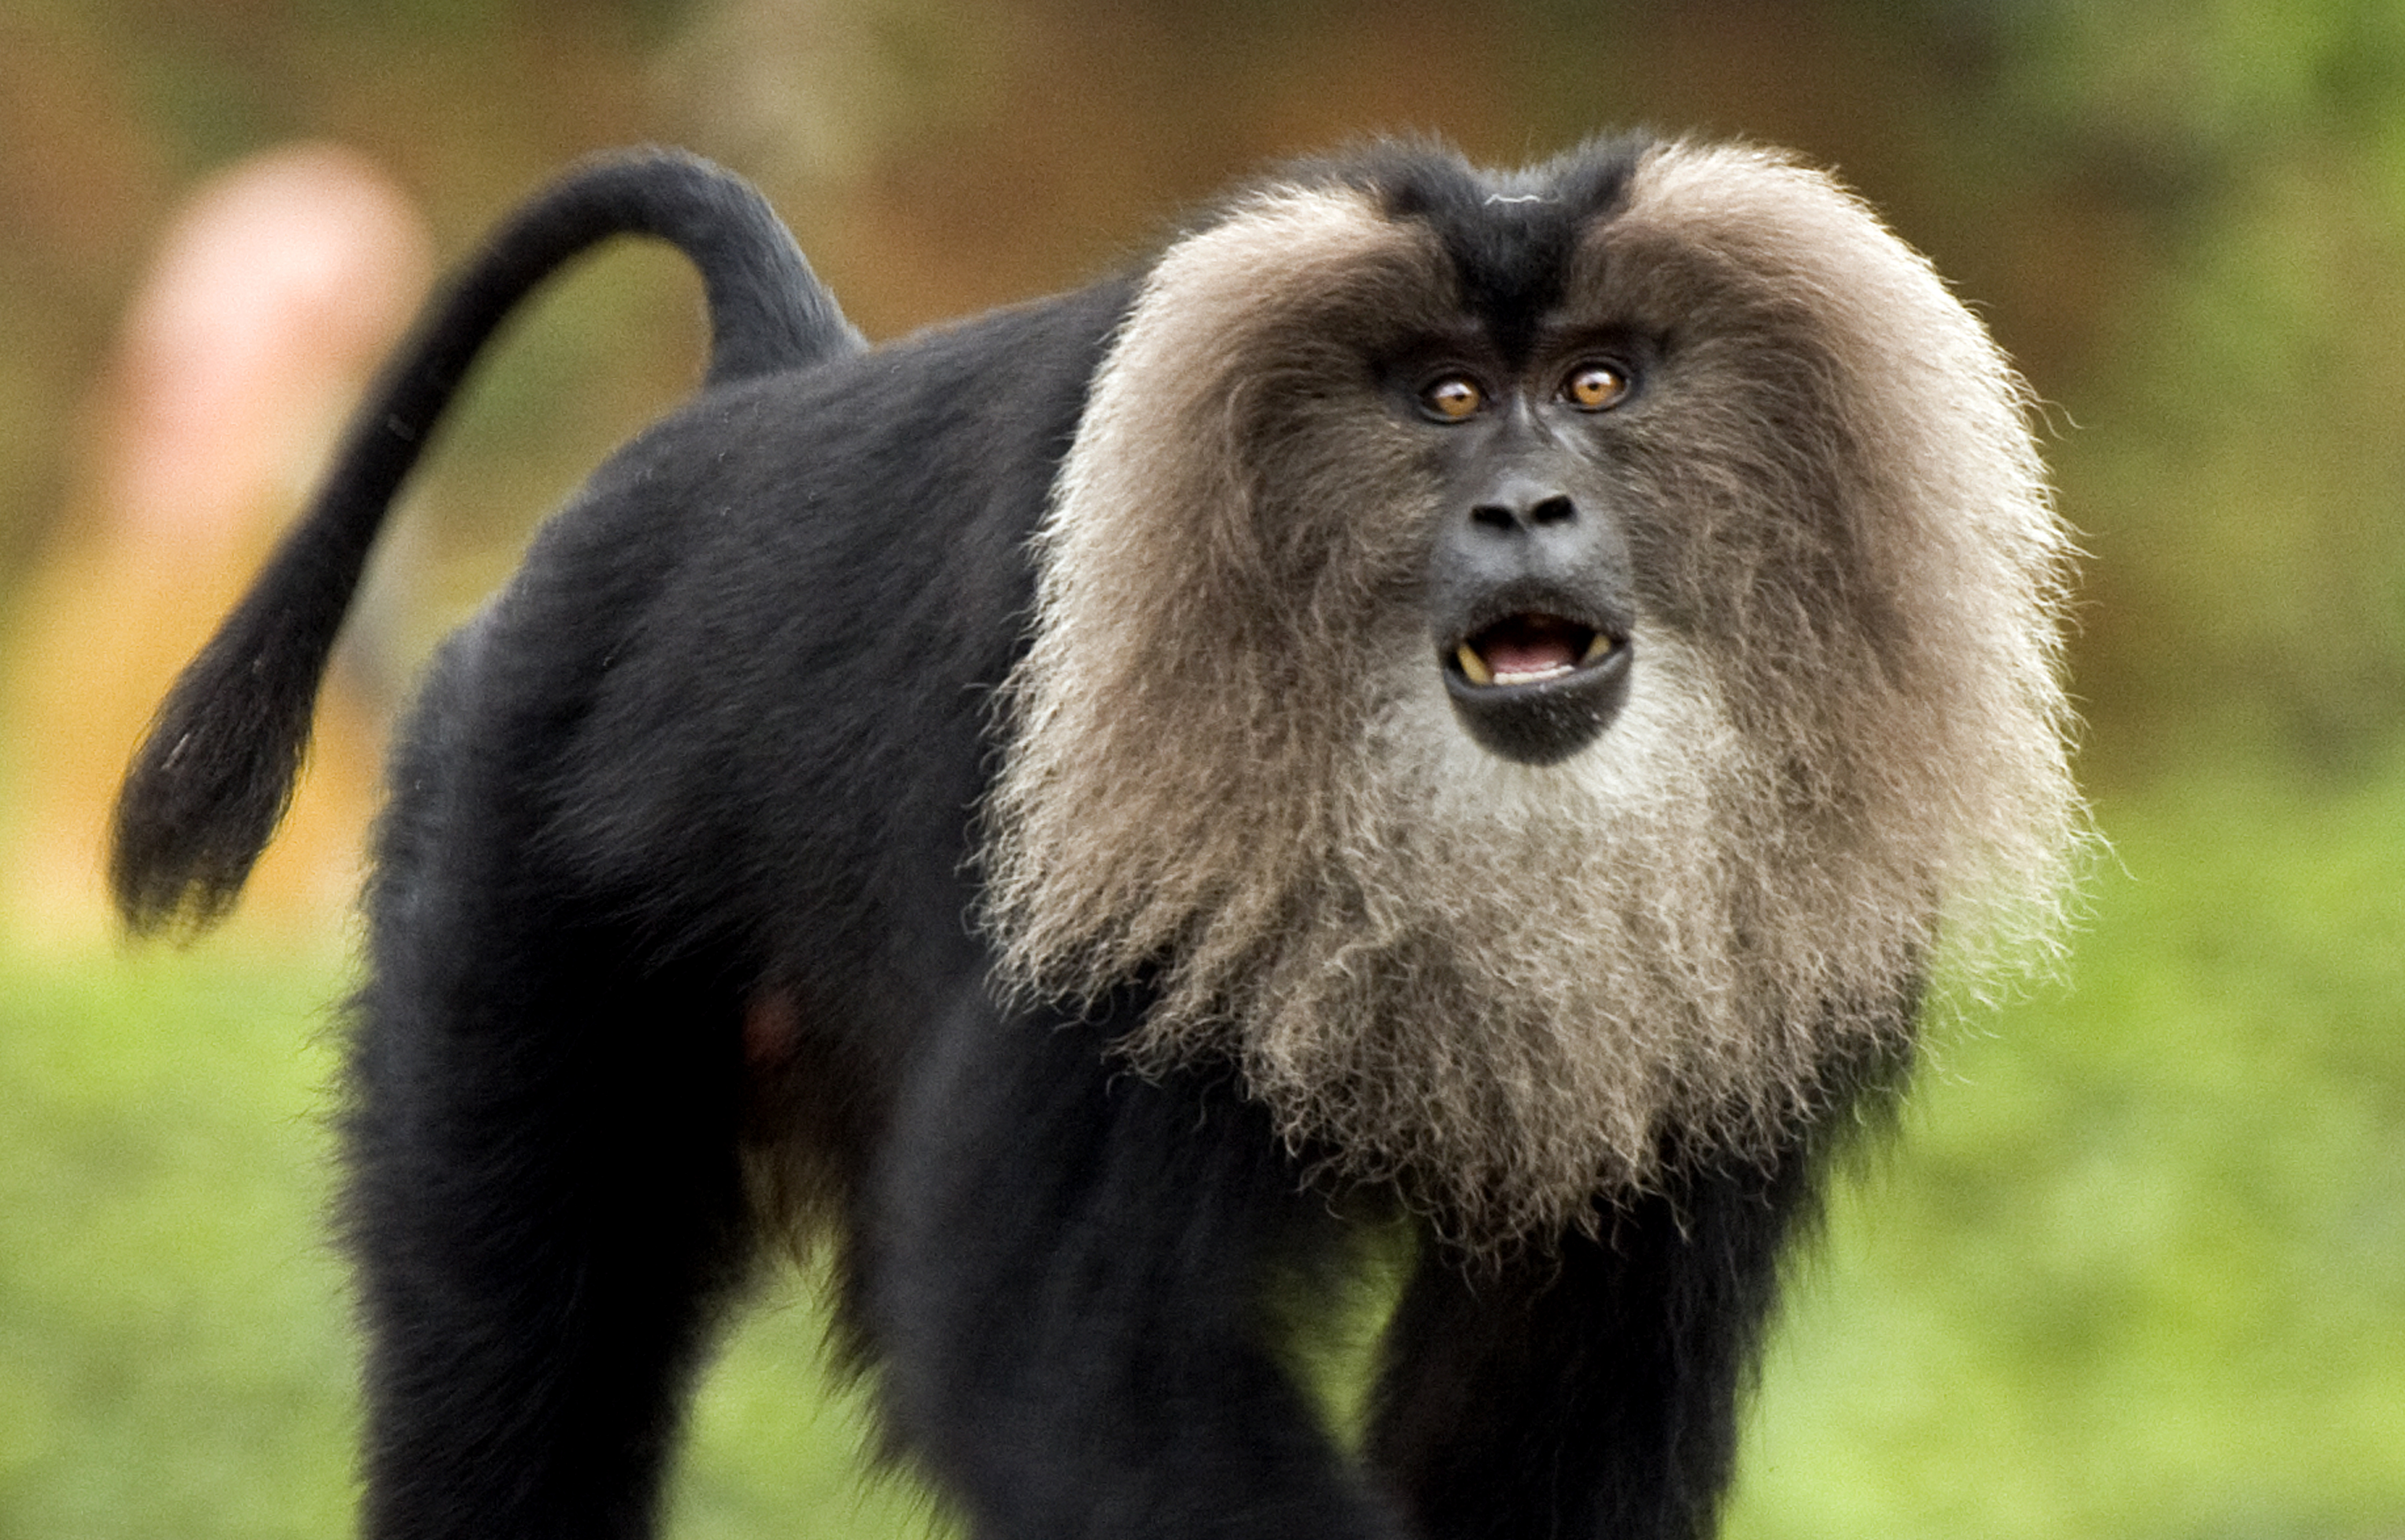 File:Lion-tailed macaque by N A Nazeer.jpg - Wikimedia Commons